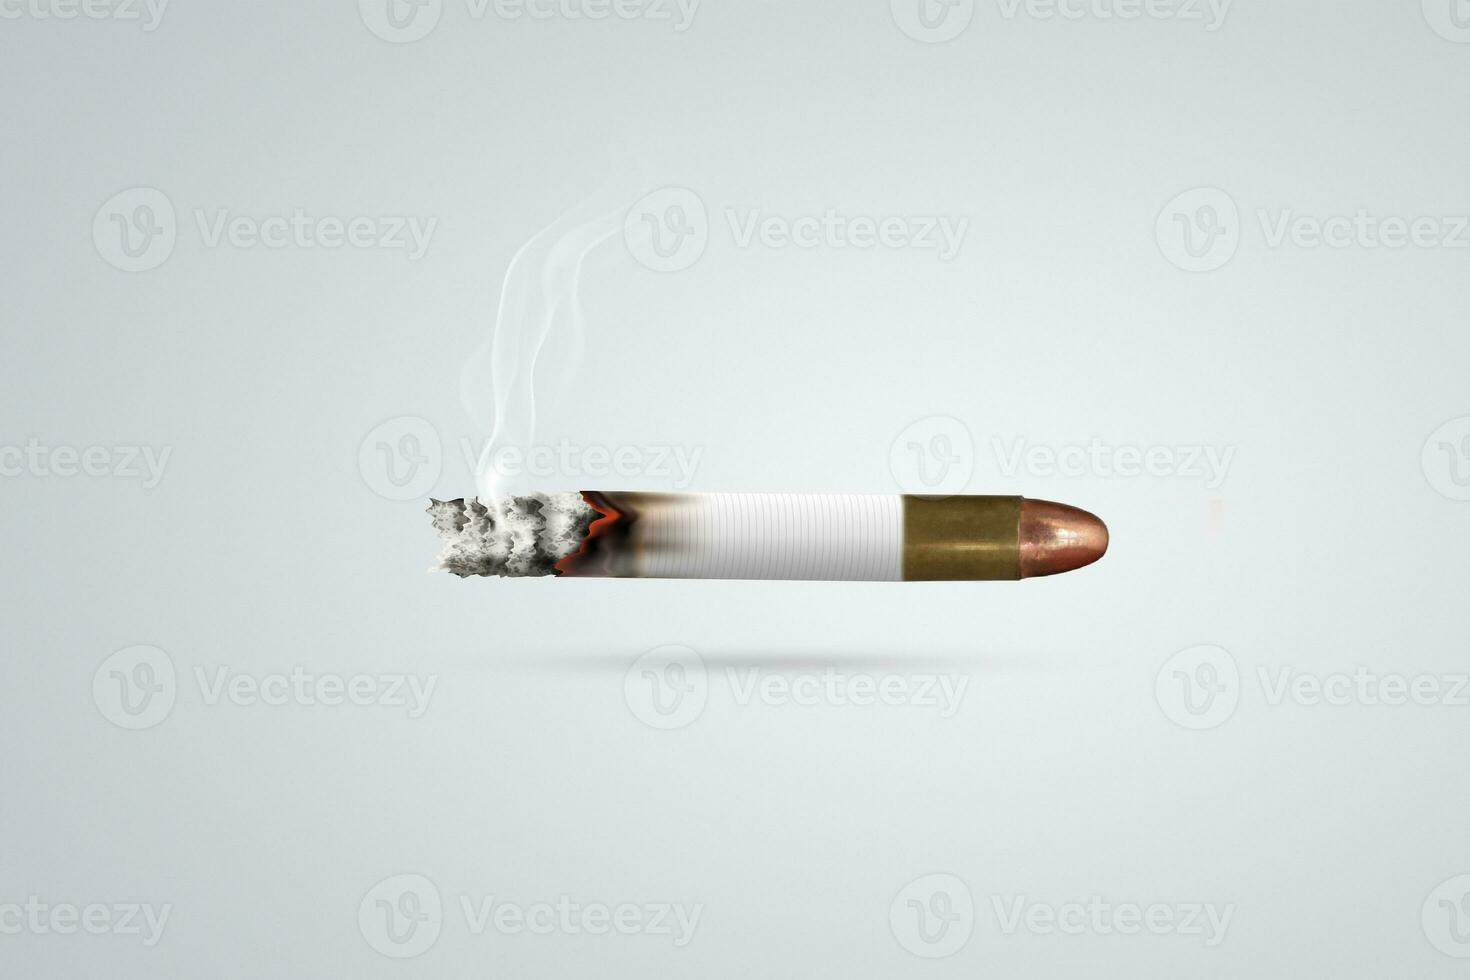 Quit Tobacco, Cigarette and Lungs Creative Concept and Concept of No smoking Photo. photo